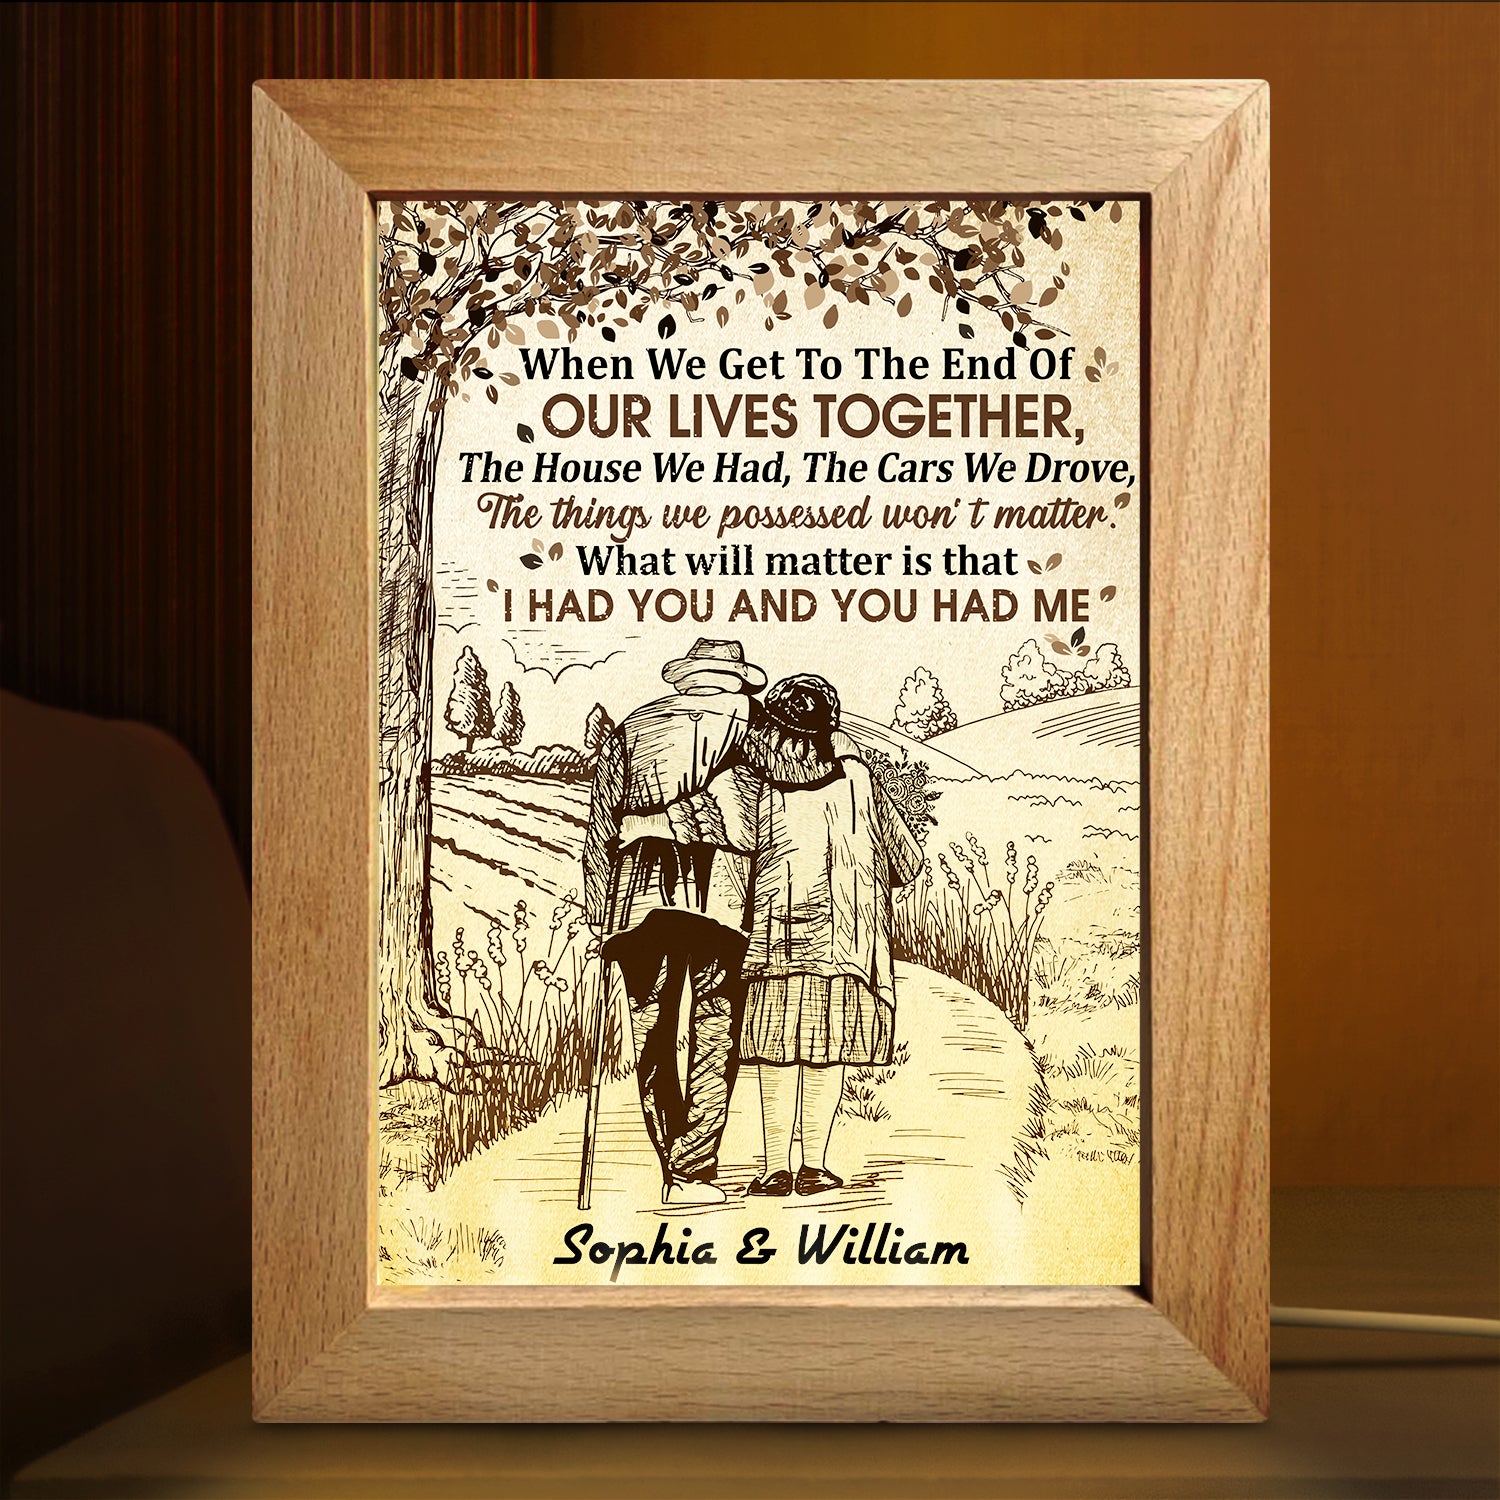 When We Get To The End - Anniversary Gift For Old Couple, Husband, Wife - Personalized Frame Lamp